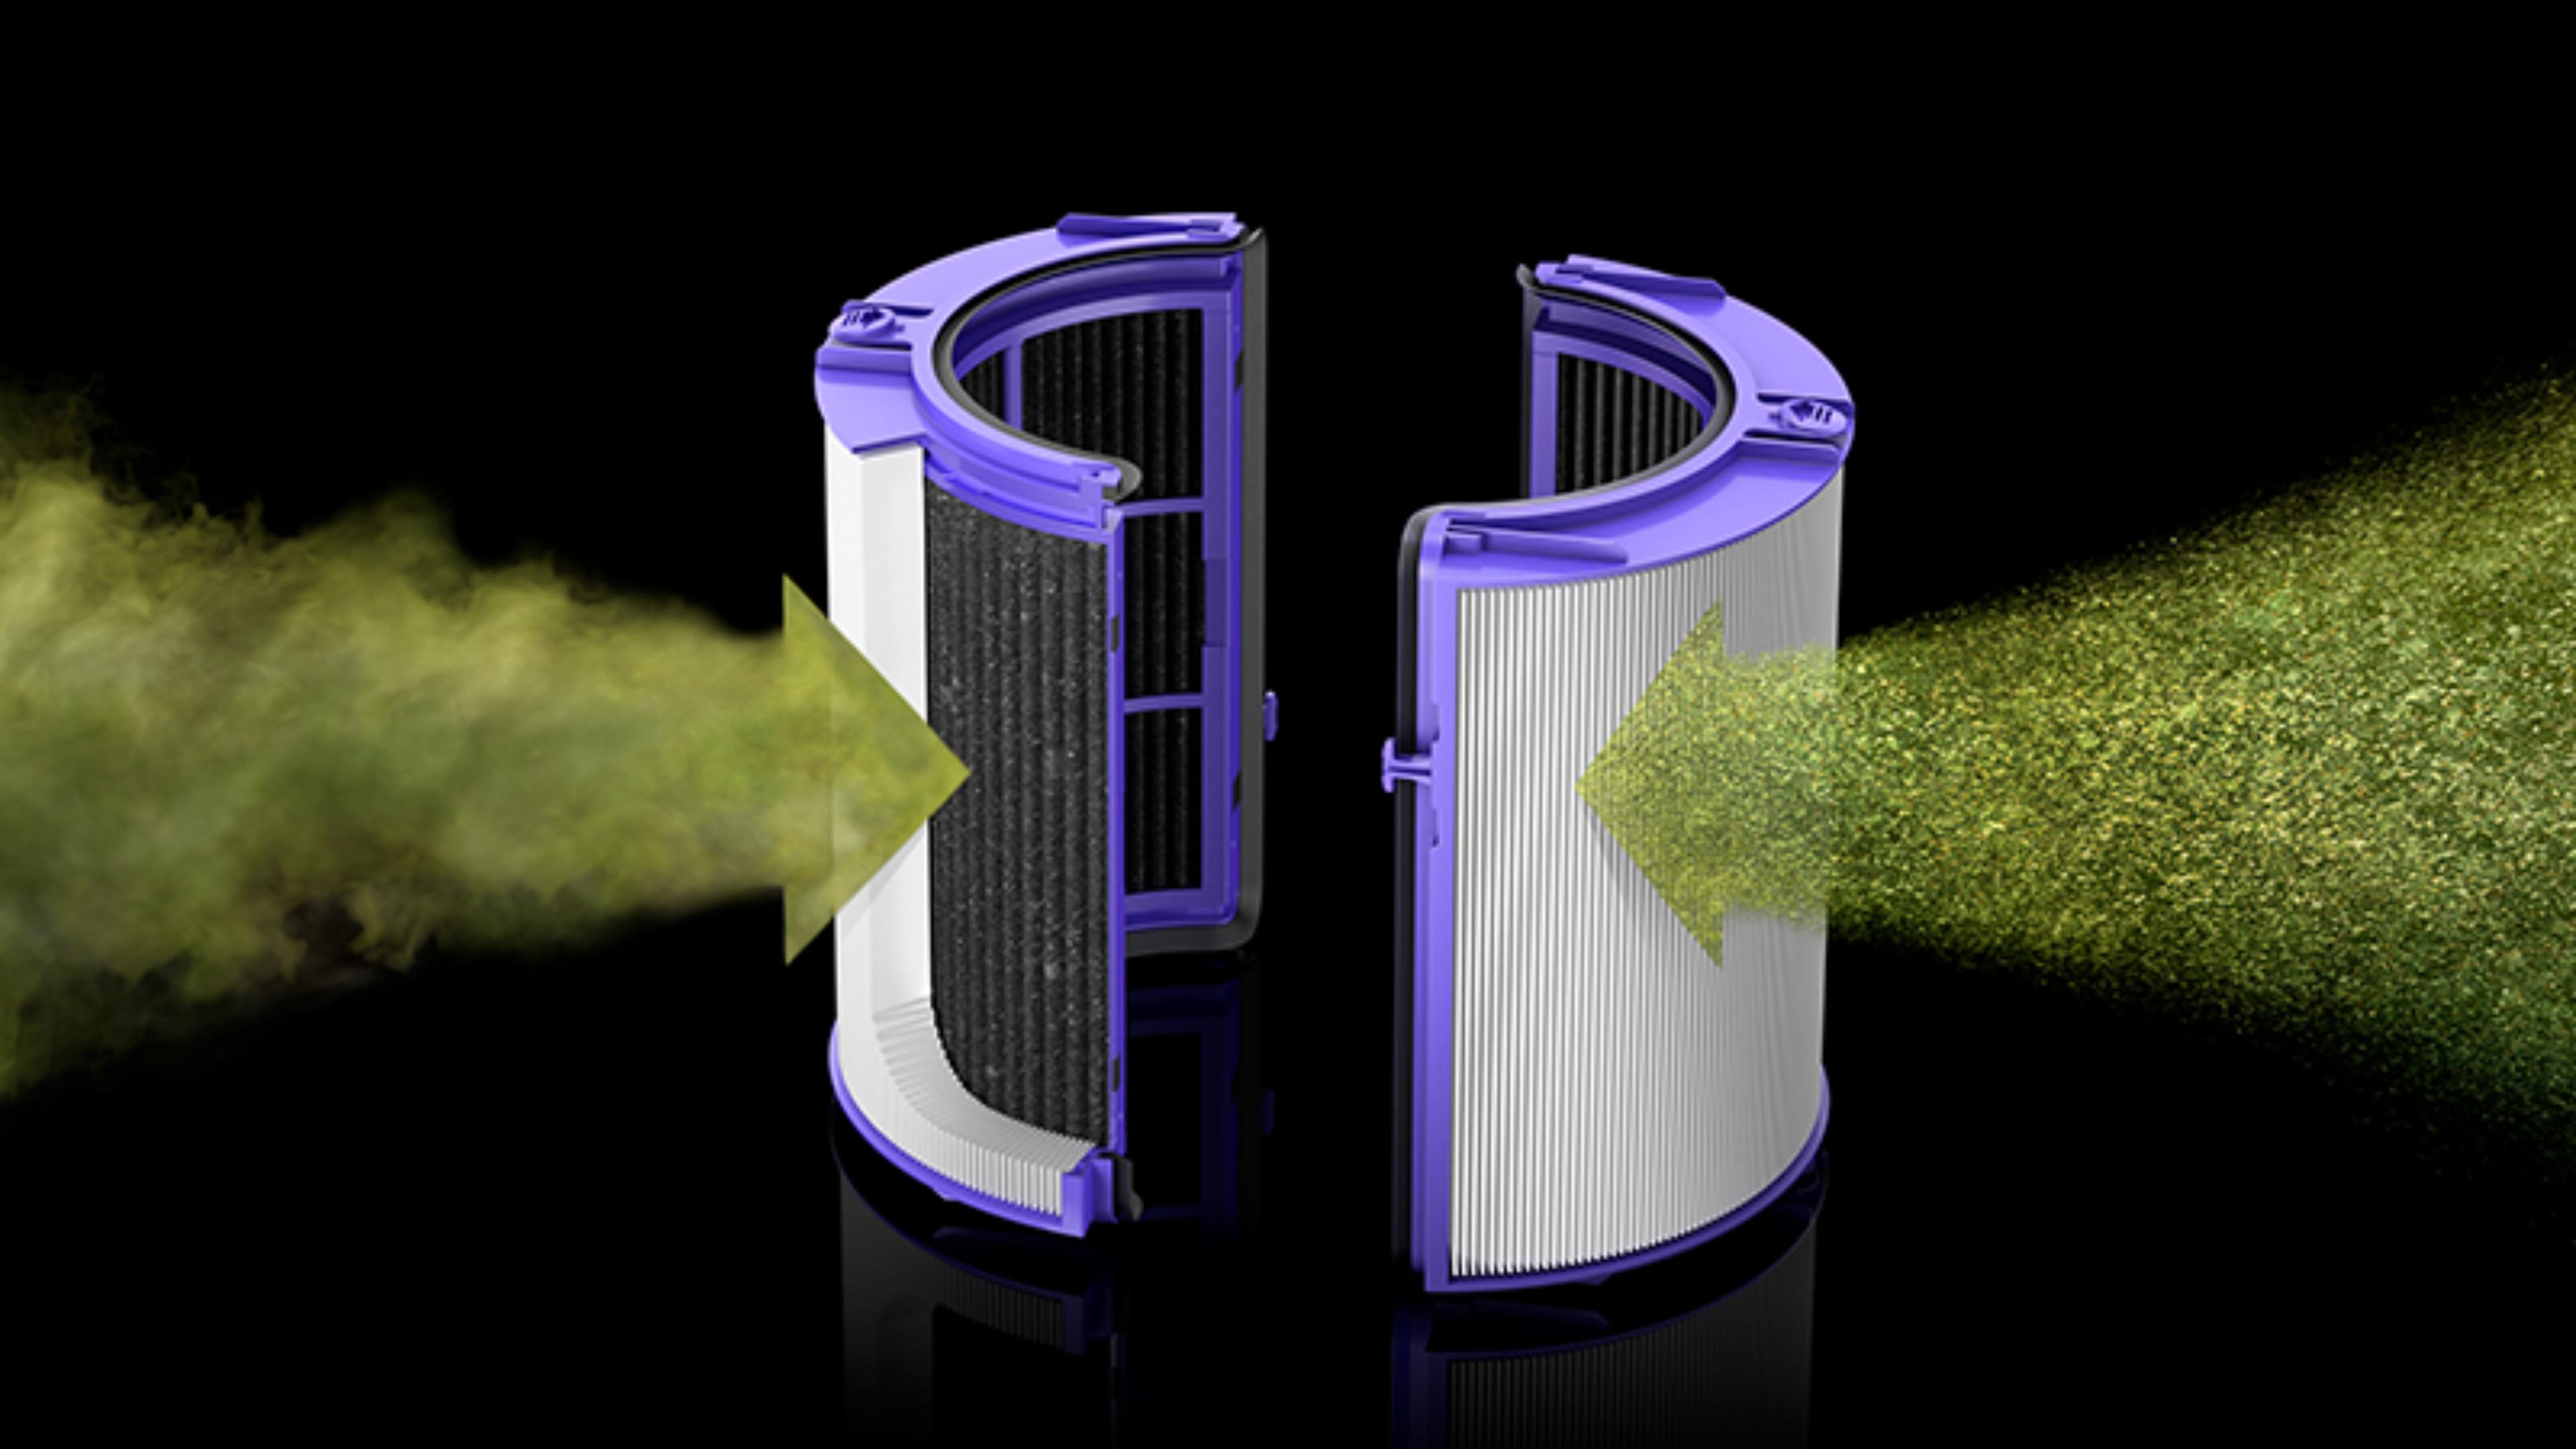 Dyson purifier filtration system capturing gases and pollutants